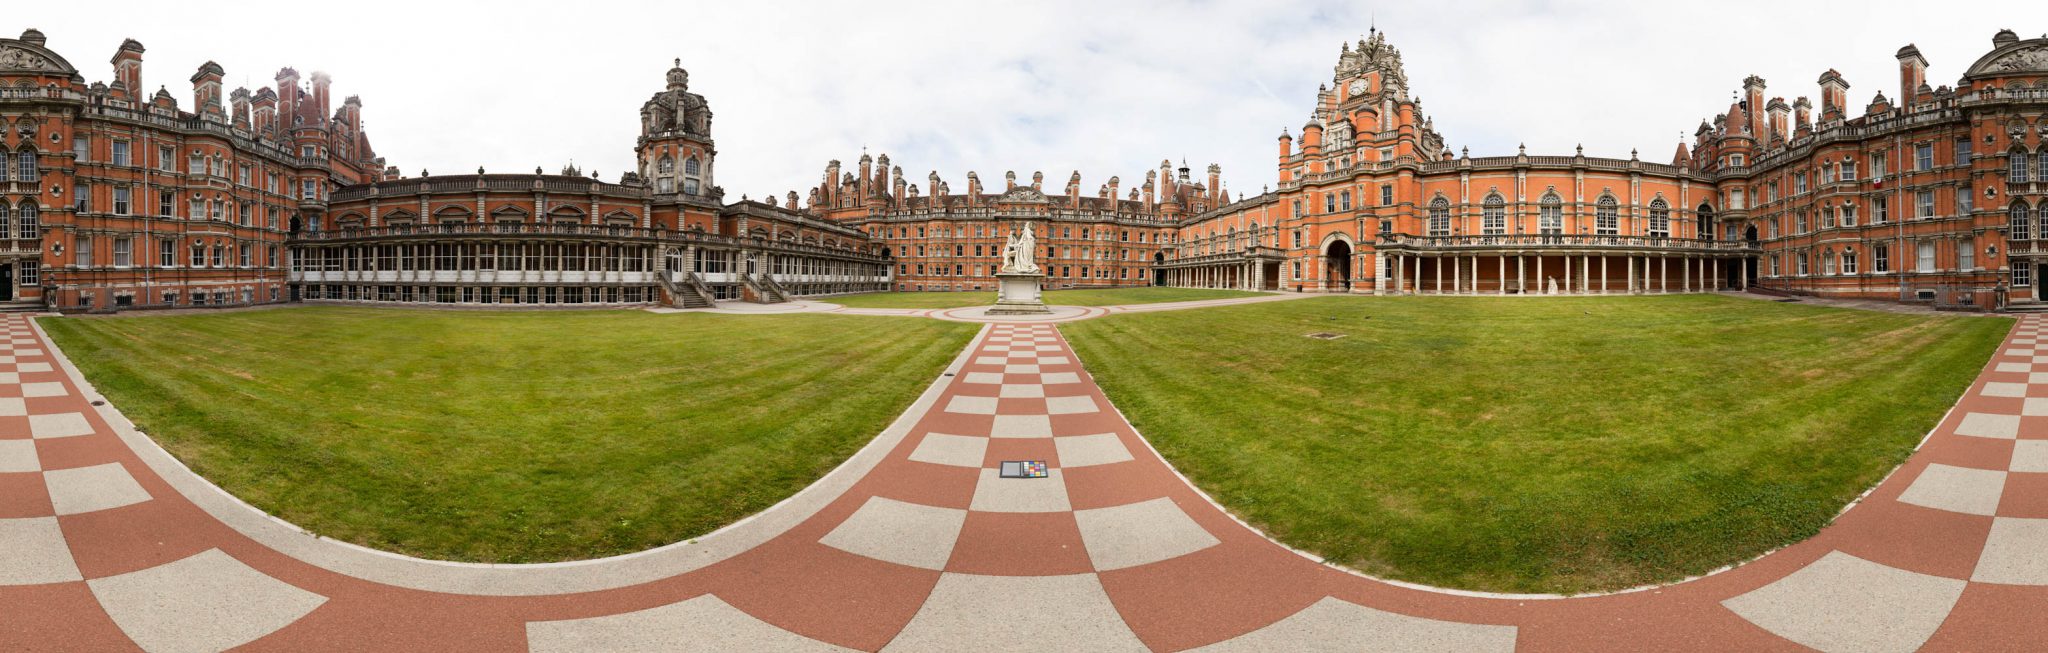 Panoramic Image from a 3D scan and texture capture session at the Royal Holloway Founders Building in Egham, Surrey